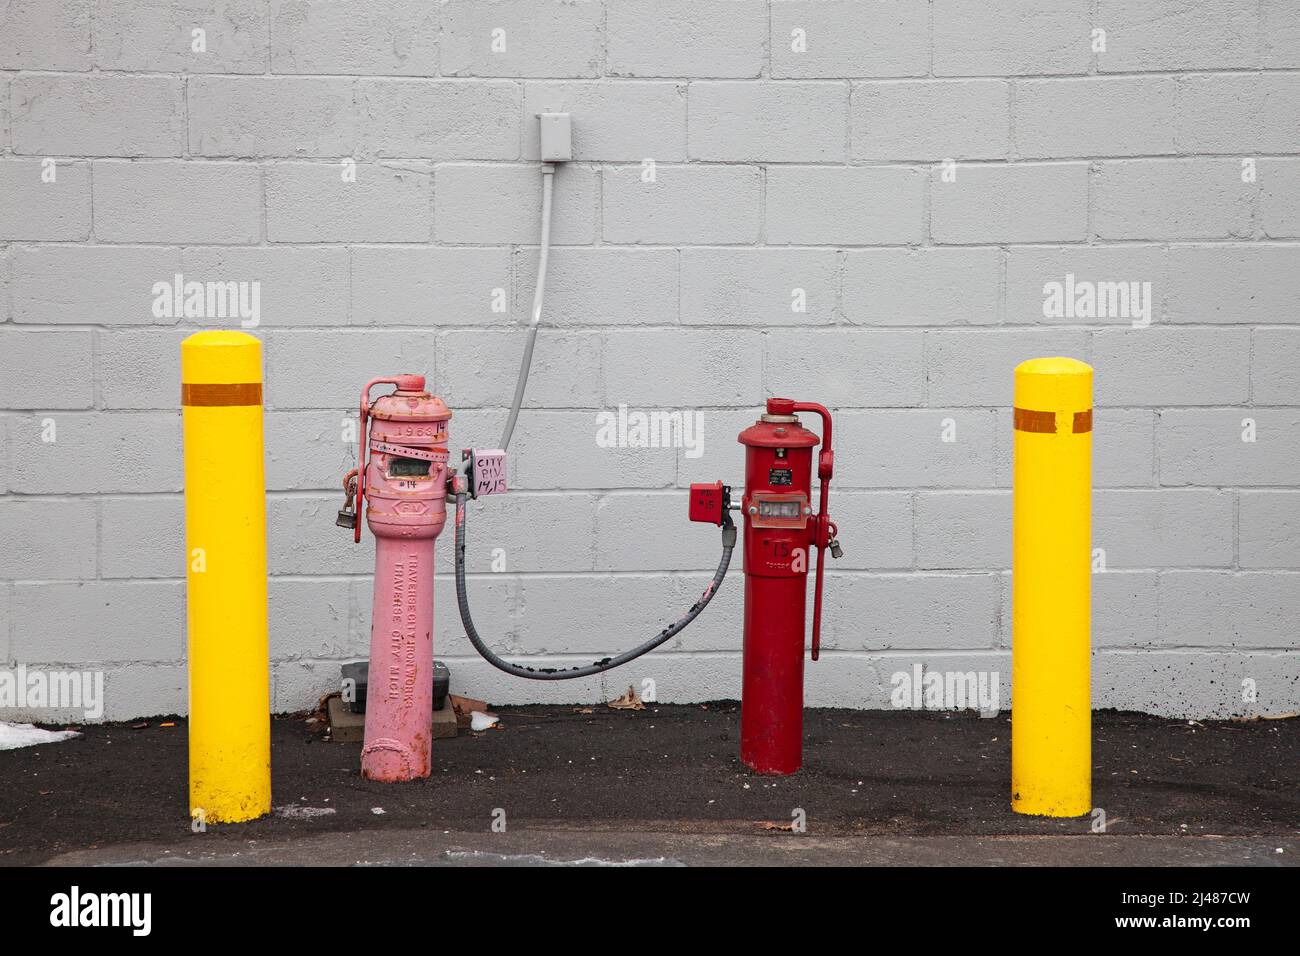 Pair of pink and red meters by the side of a building believed to be measuring gas usage. St Paul Minnesota MN USA Stock Photo